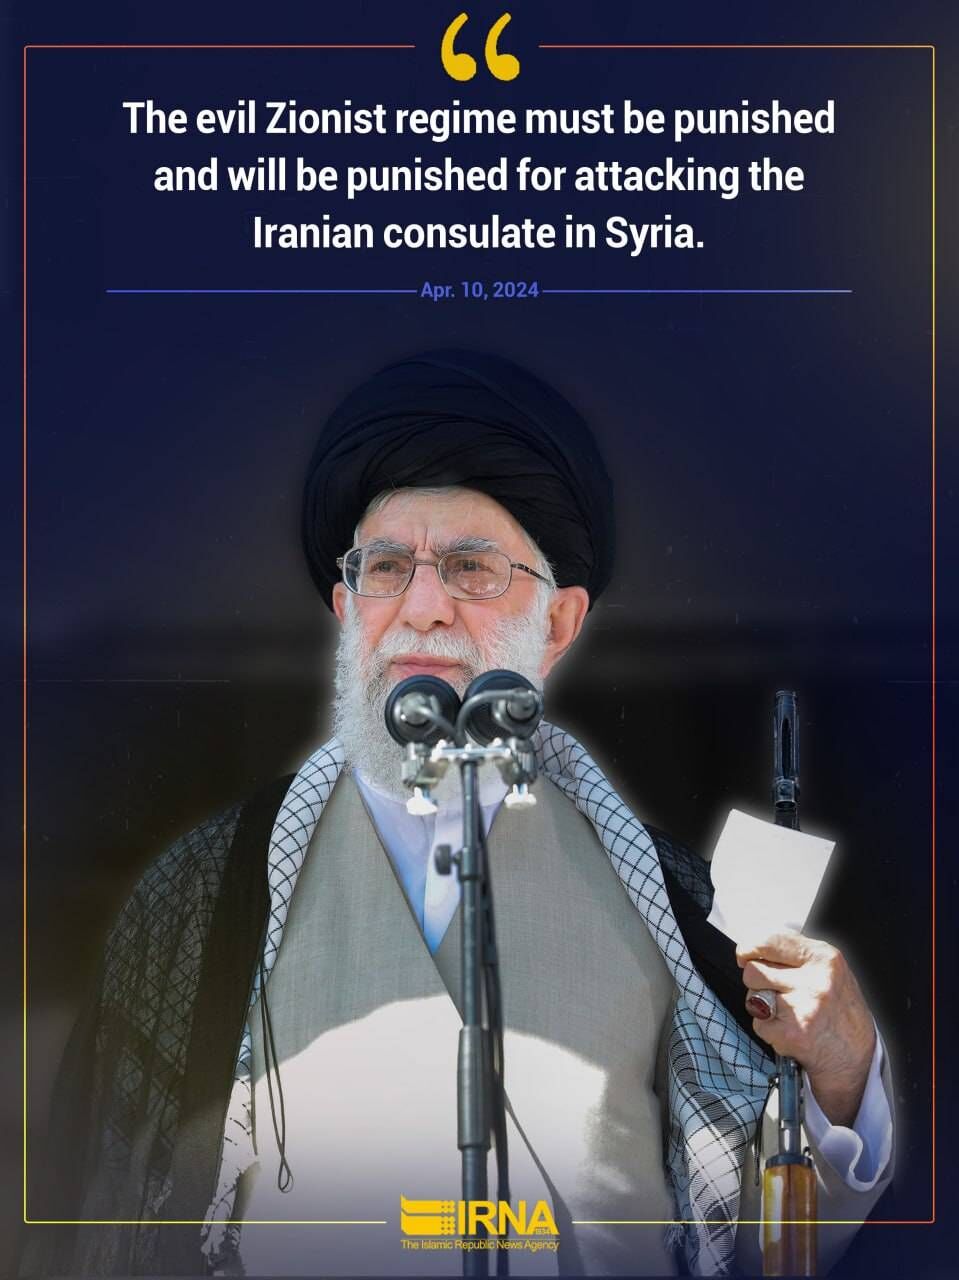 Supreme Leader: The Zionist regime will be punished